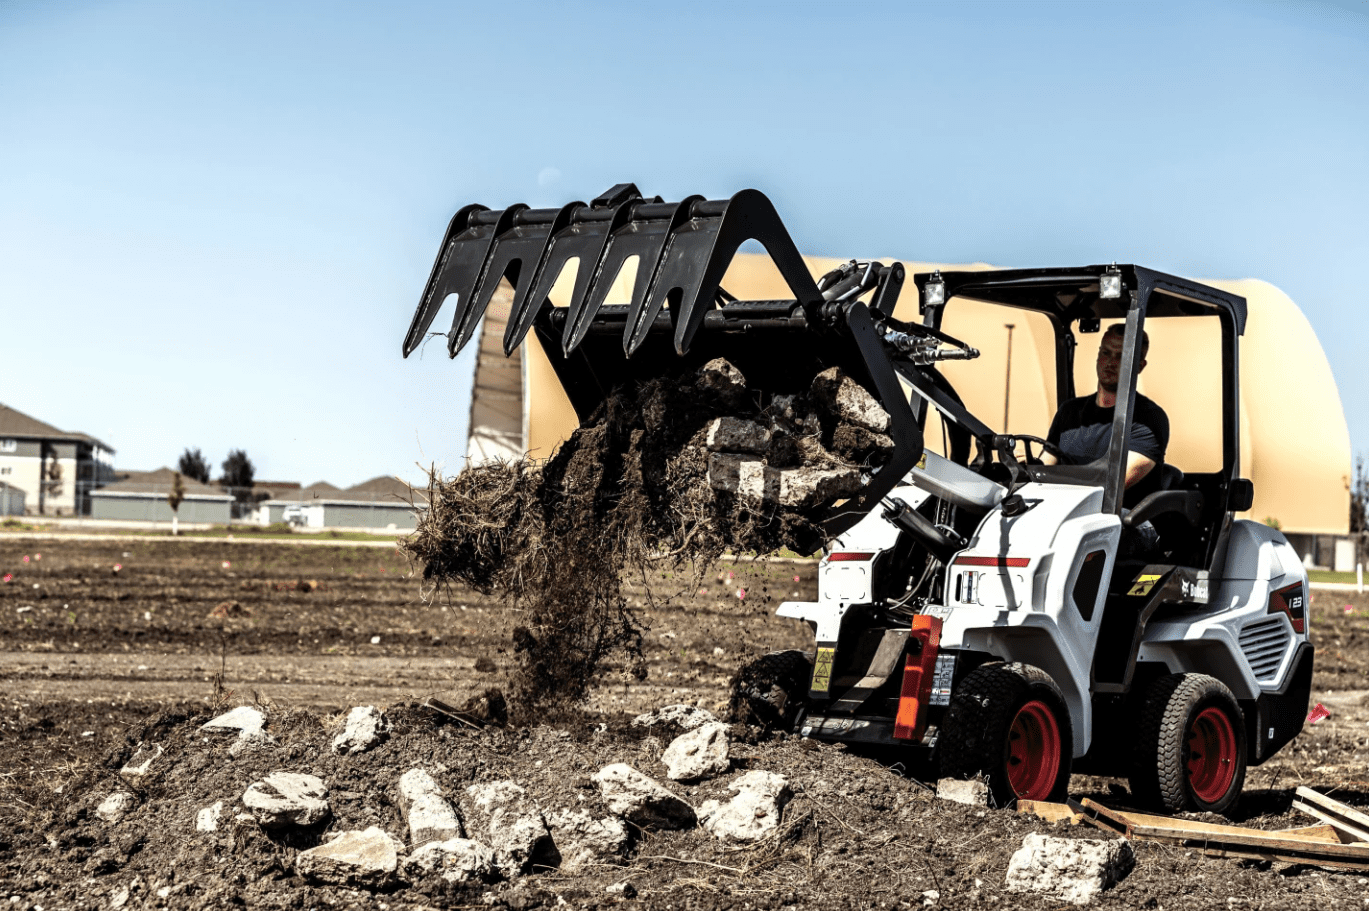 Browse Specs and more for the L23 Small Articulated Loader - Bobcat of Huntsville